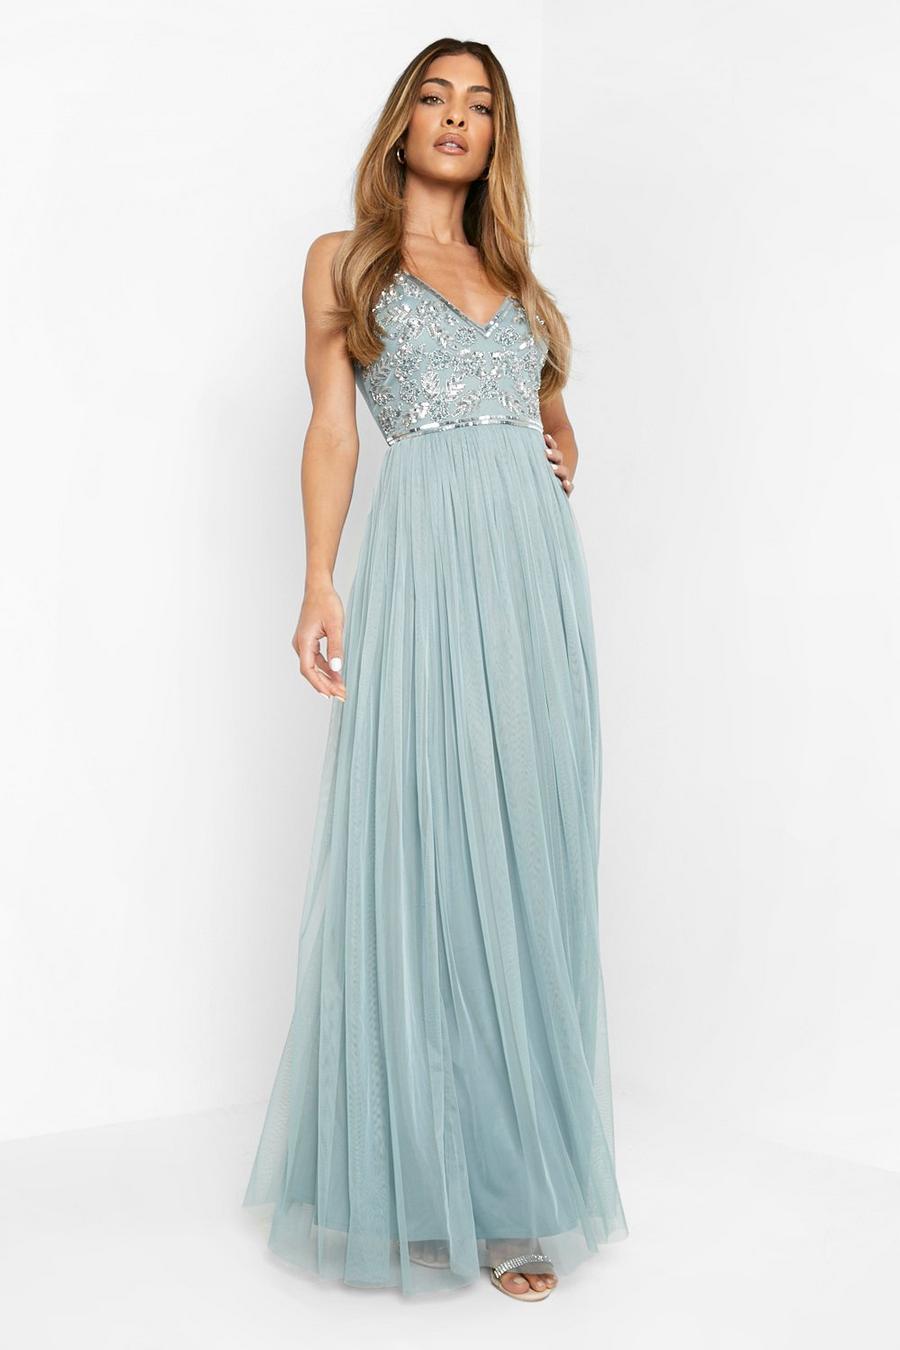 Blue Bridesmaid Hand Embellished Strappy Maxi